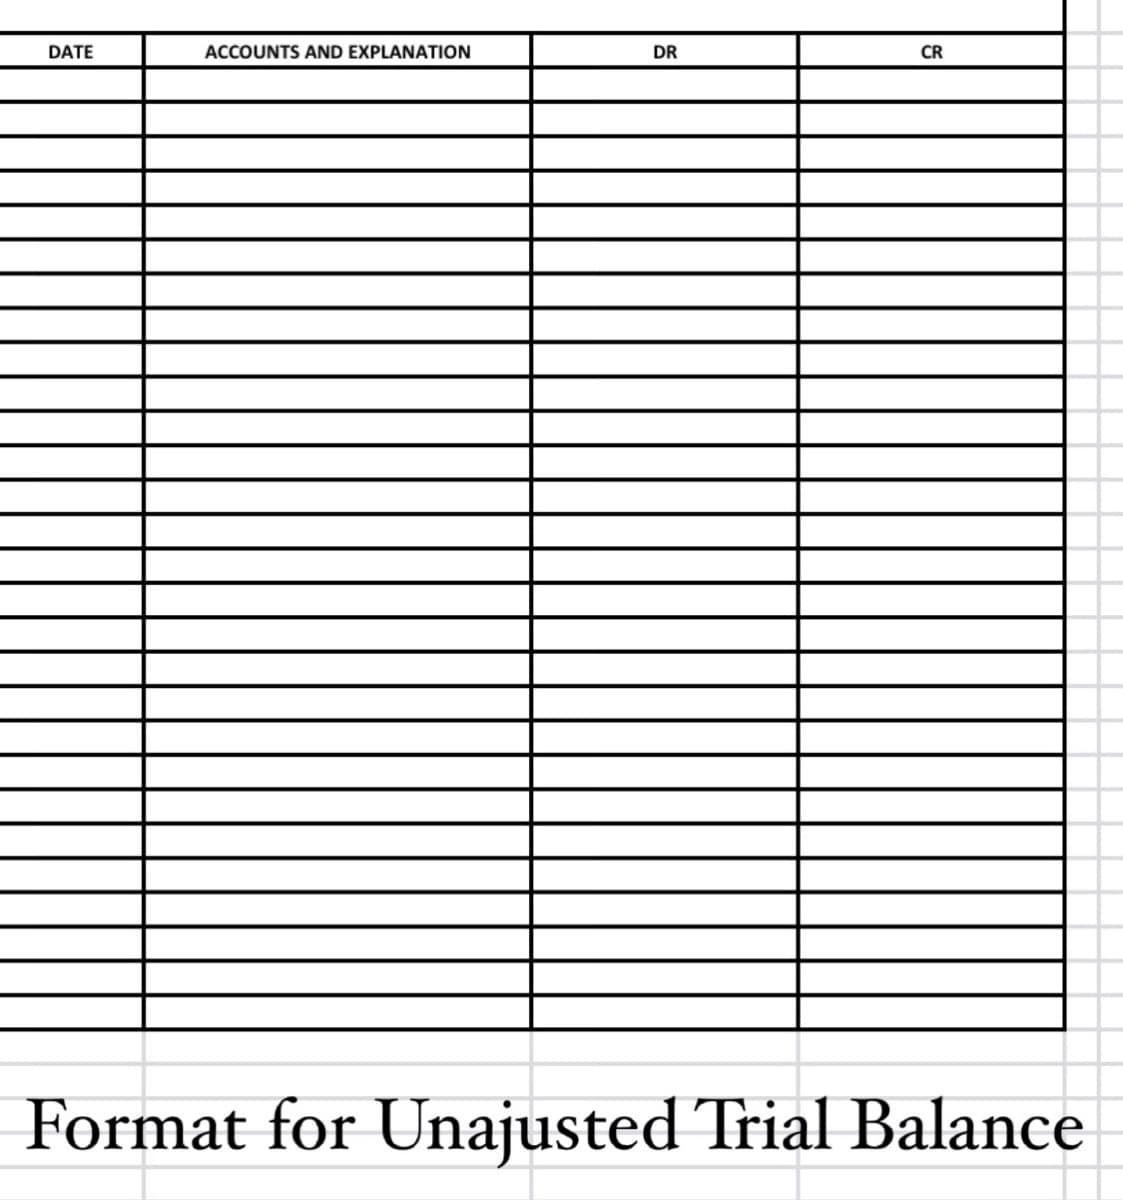 DATE
ACCOUNTS AND EXPLANATION
DR
CR
Format for Unajusted Trial Balance
